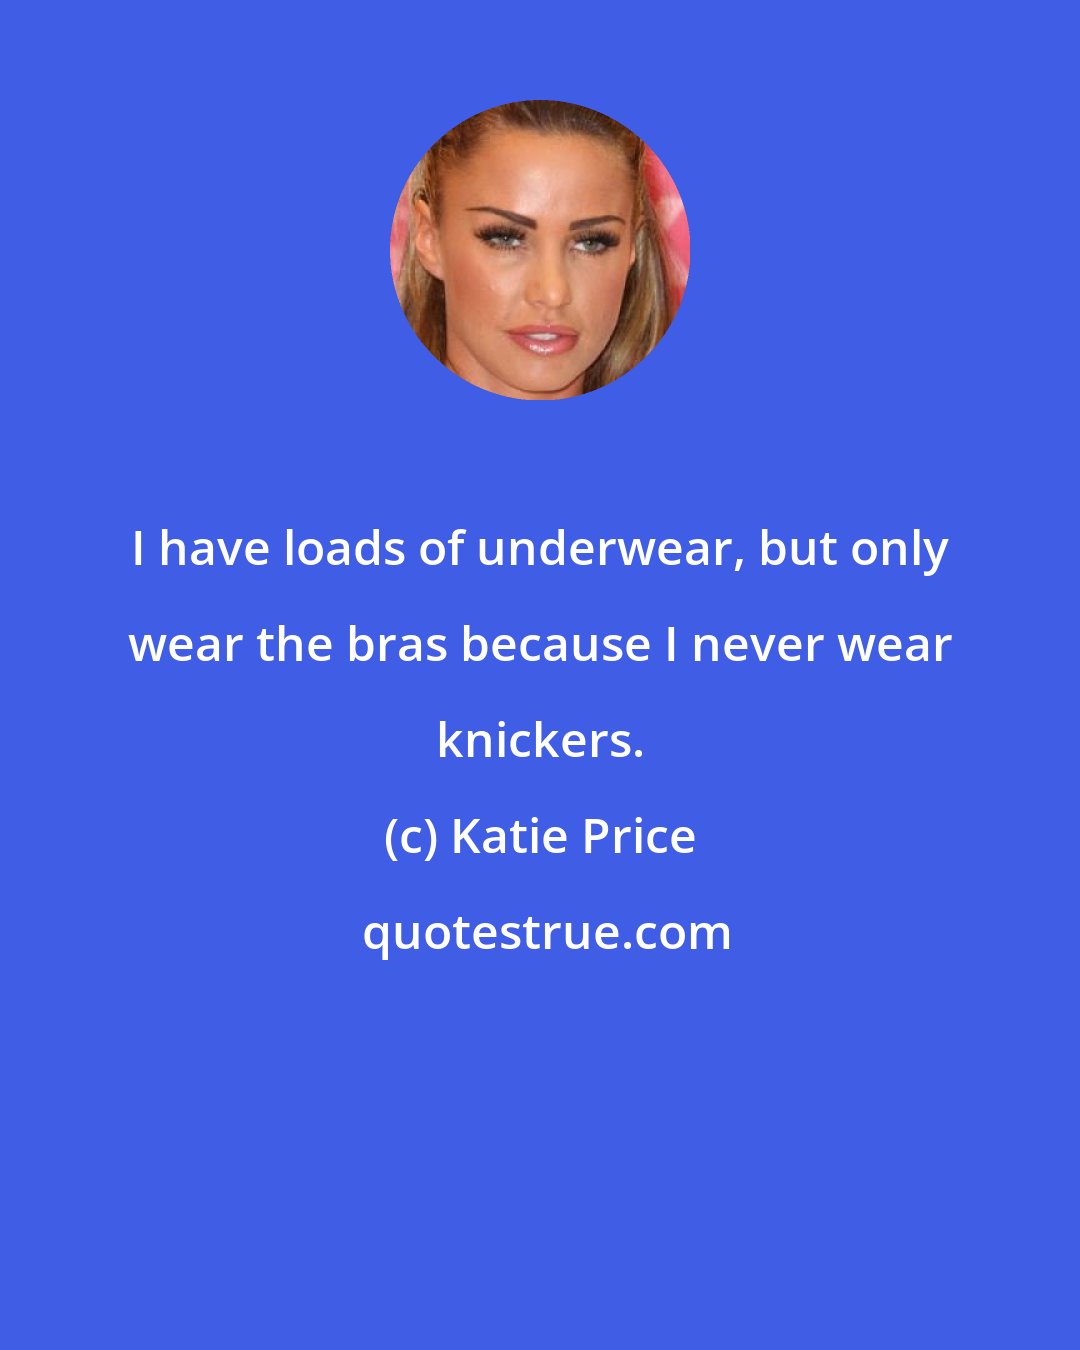 Katie Price: I have loads of underwear, but only wear the bras because I never wear knickers.